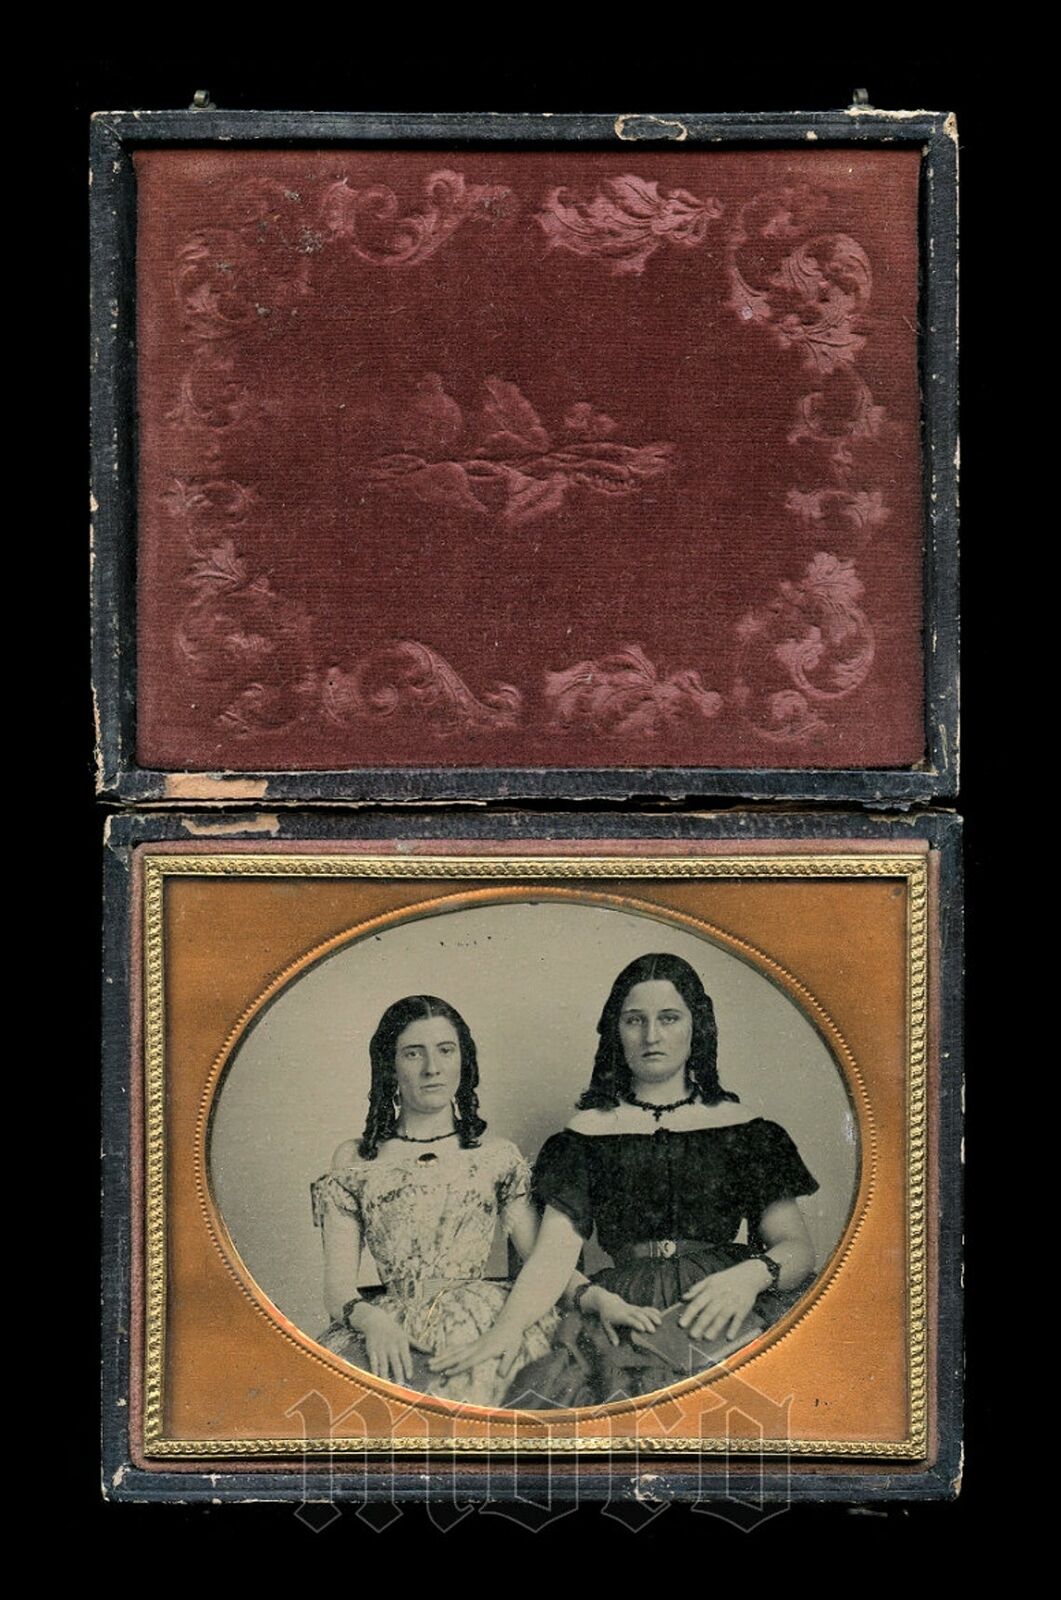 NICE 1/4 AMBROTYPE PHOTO GIRLS HOLDING HANDS LONG CURLS IN HAIR - 1800s VIRGINIA